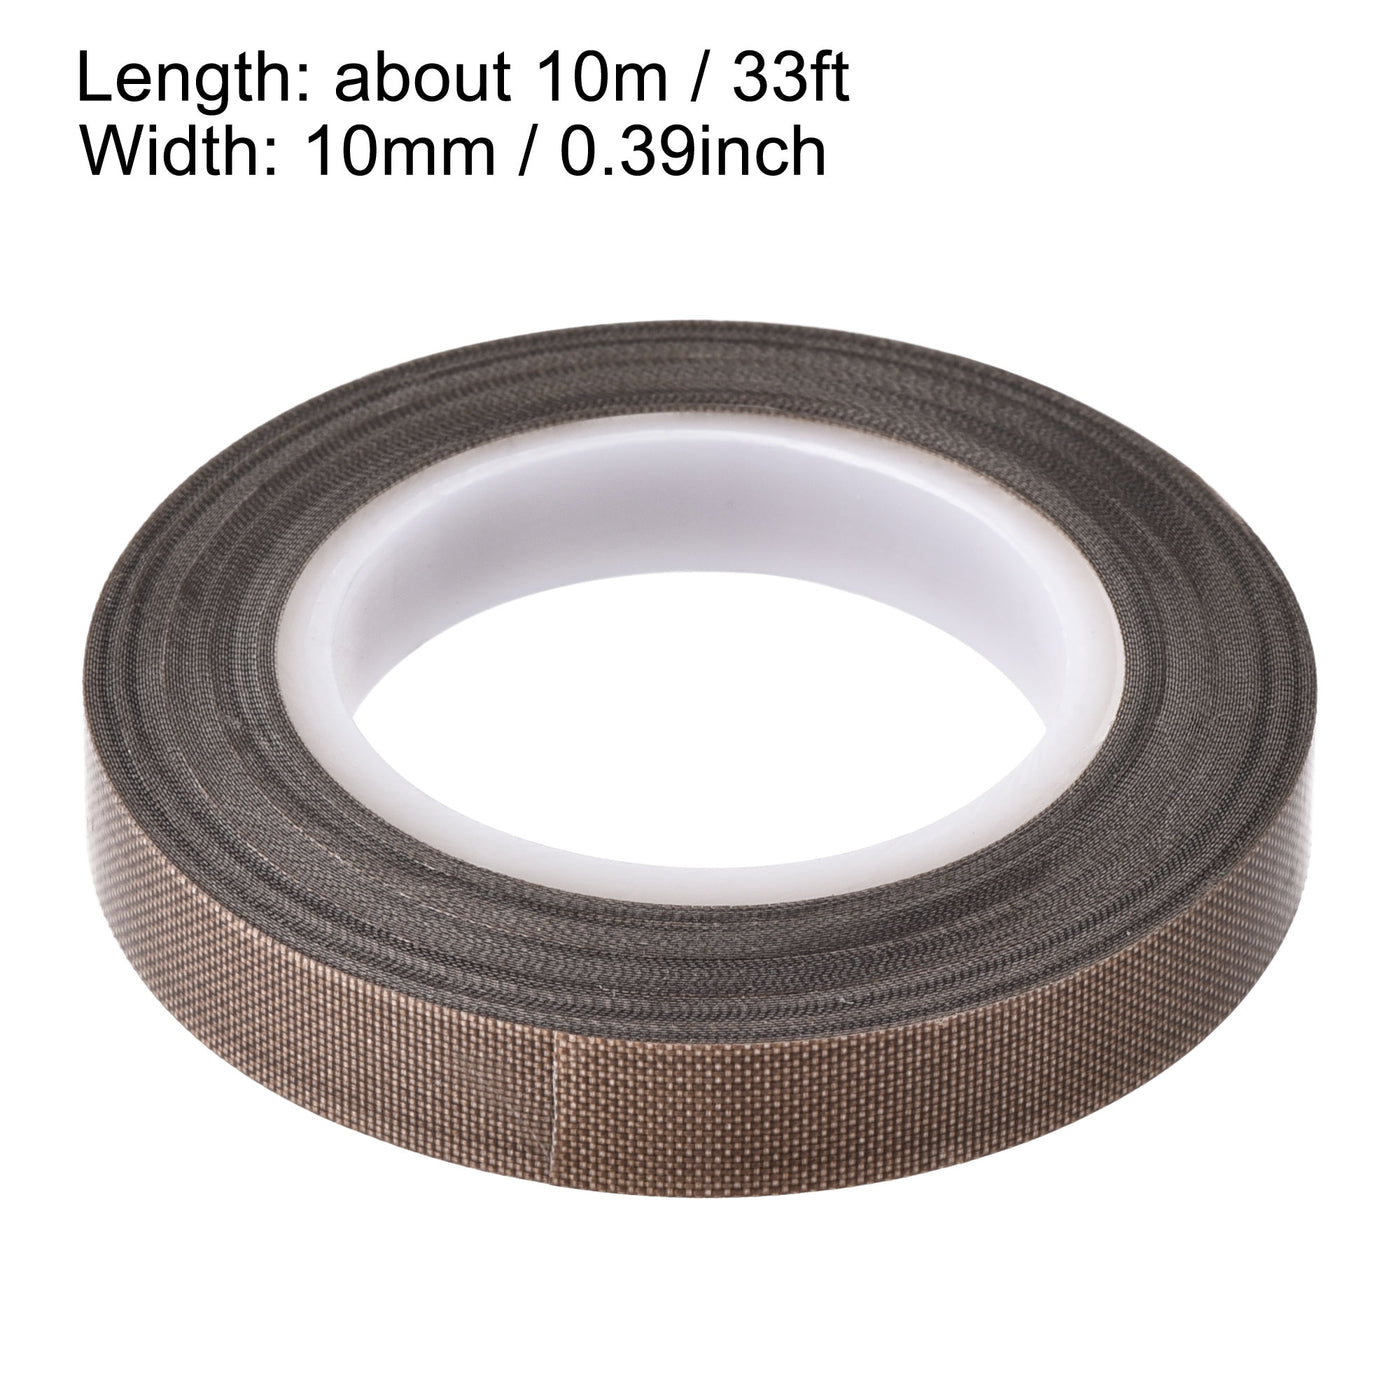 Uxcell Uxcell Heat Resistant Tape High Temperature Tape PTFE Film Adhesive Tape 19mm Width 10m 33ft Length Brown